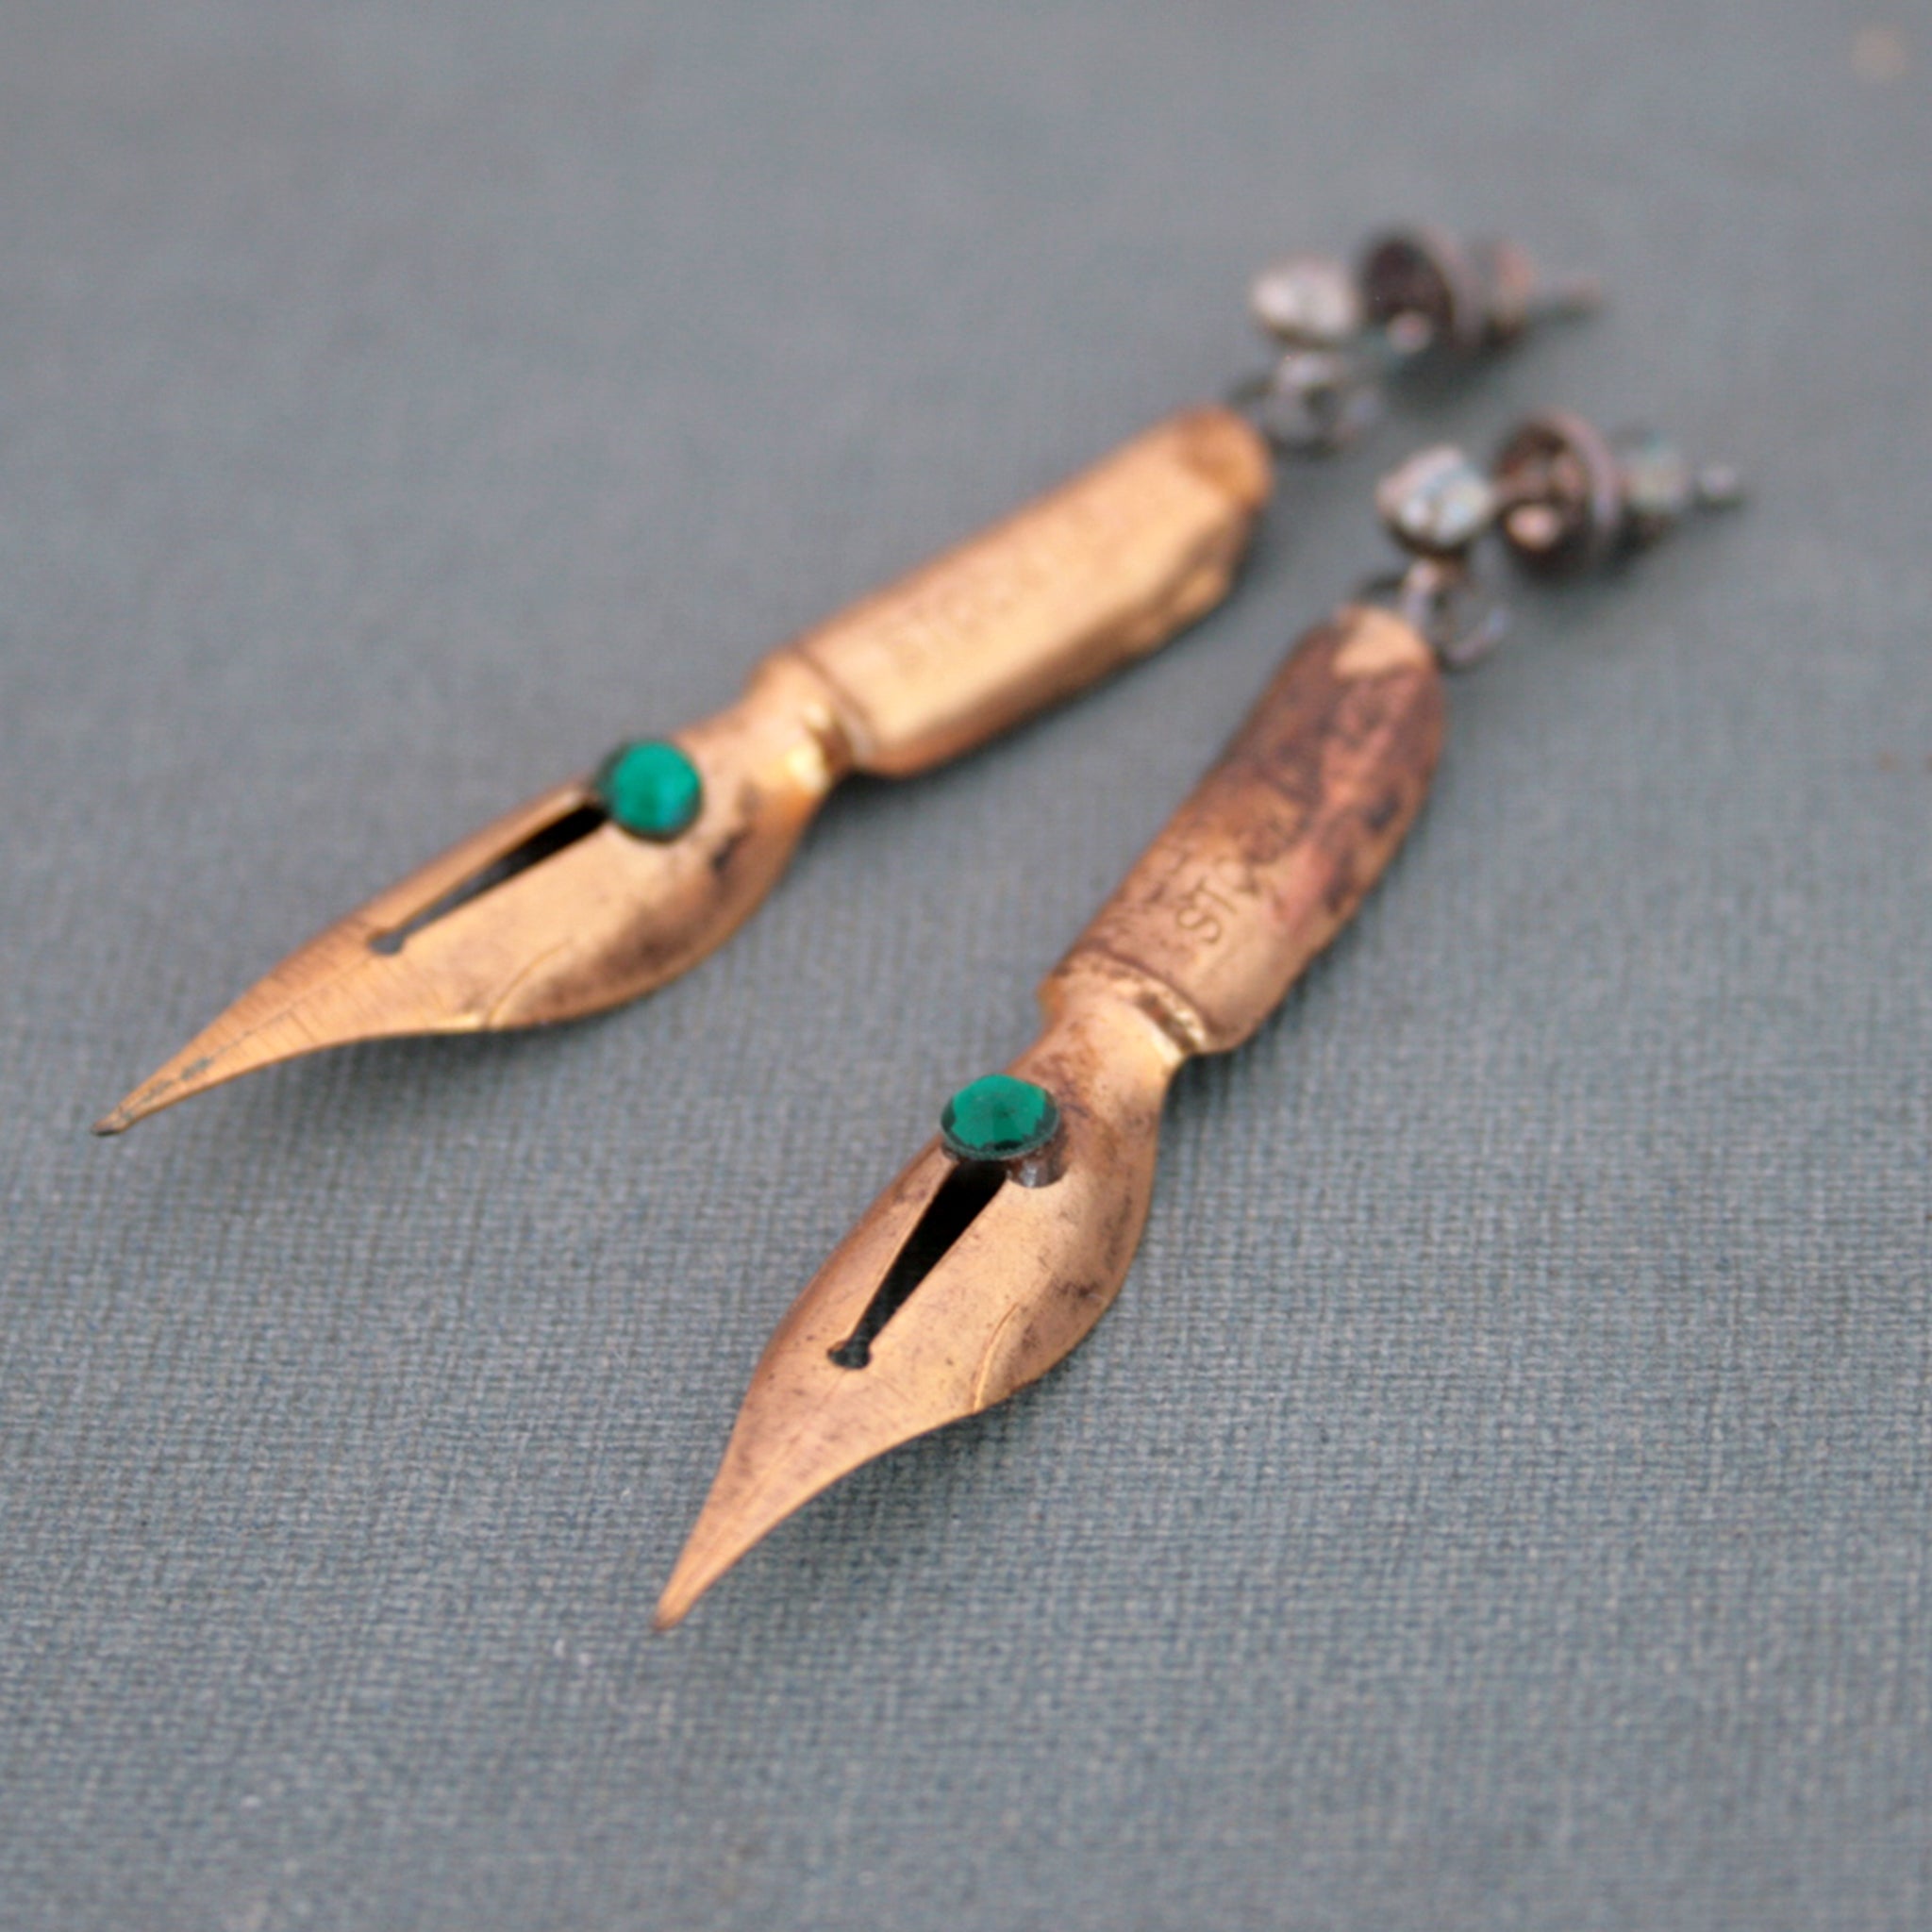 gold earrings made of real pen nibs lying on an old book